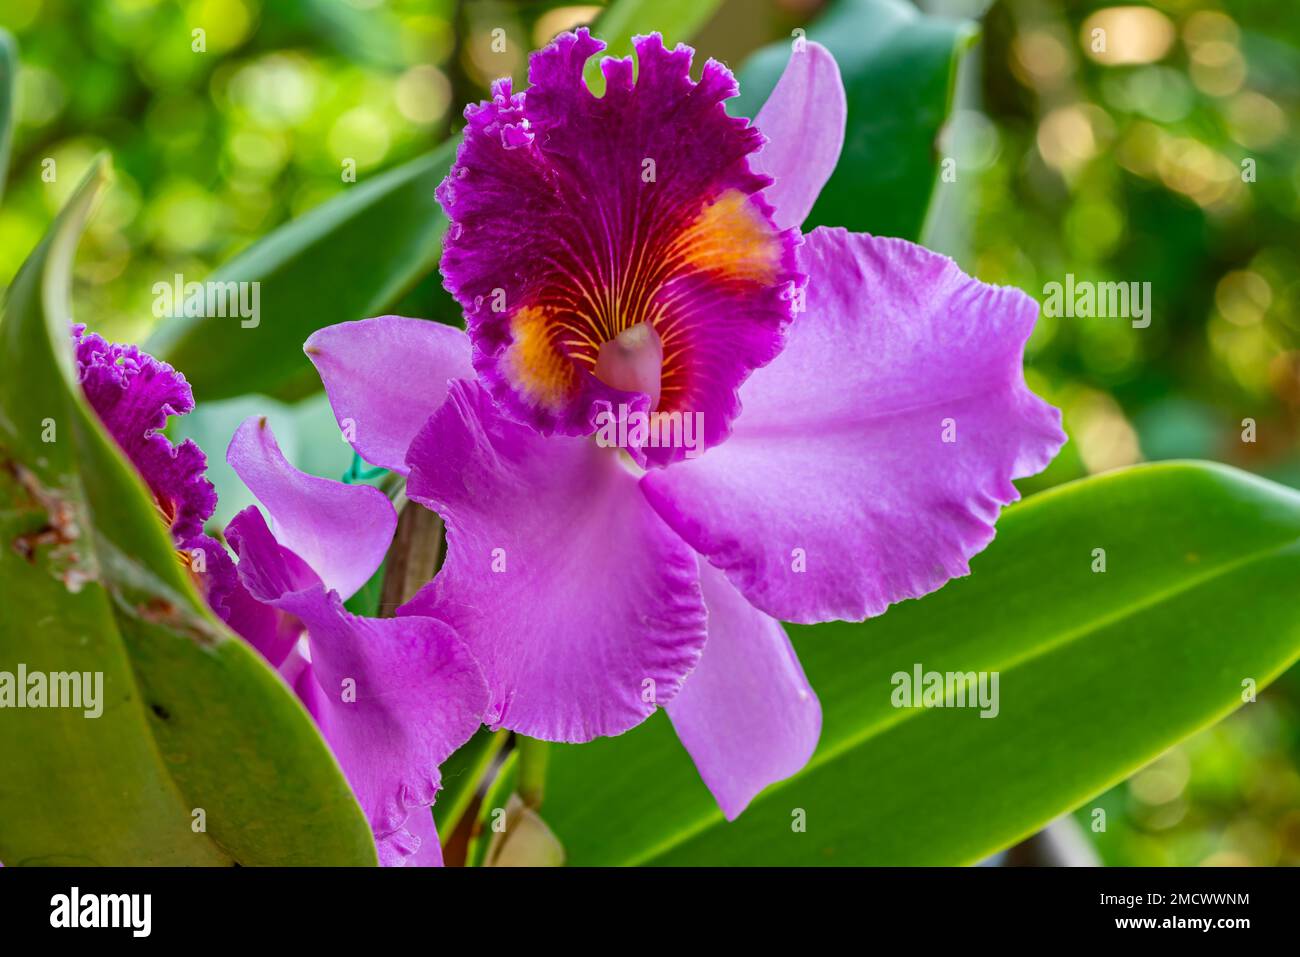 Closeup view of beautiful blooming Cattleya Orchid Flower with green leaves. Cattleya, the beautiful pink orchid flower Stock Photo